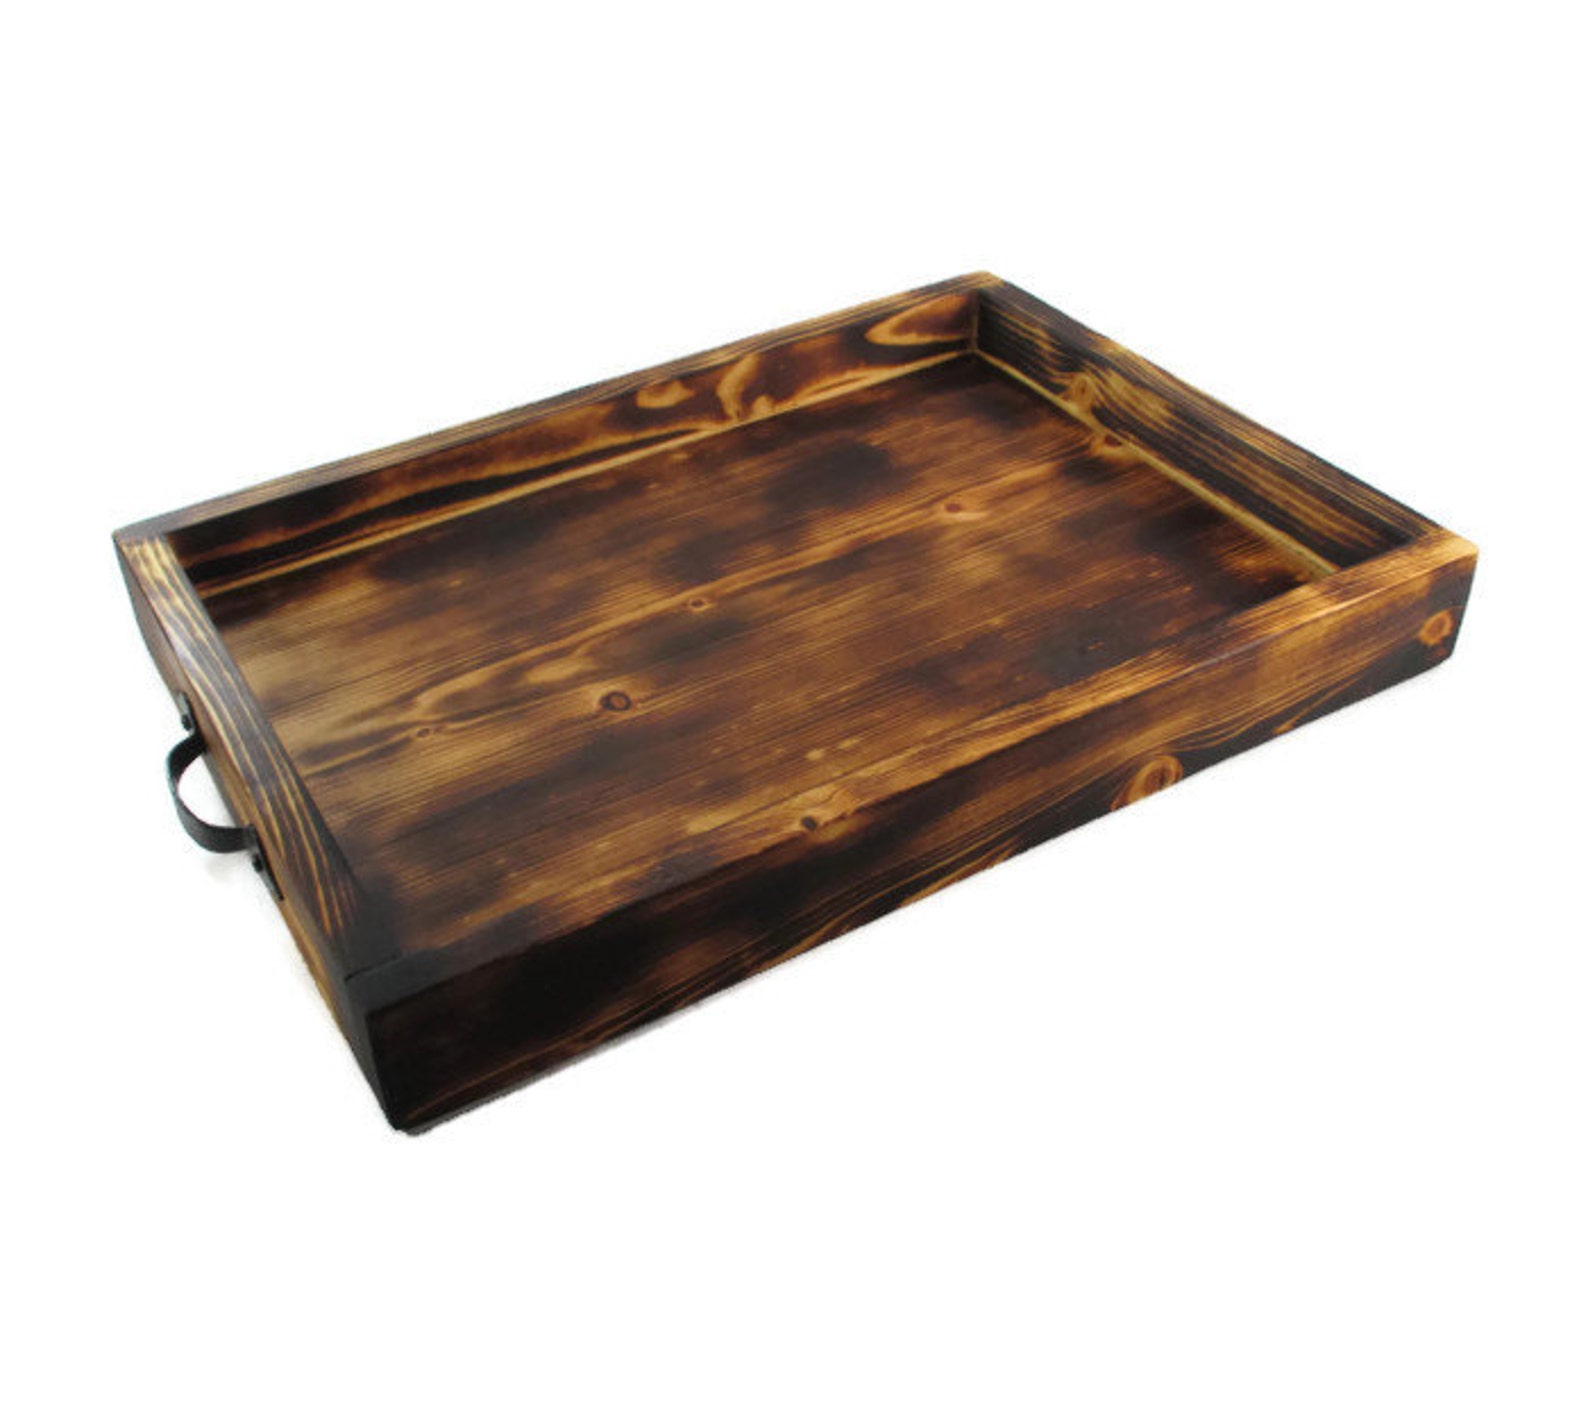 Rustic Serving Tray Lodge Decor Wood Trays - Etsy